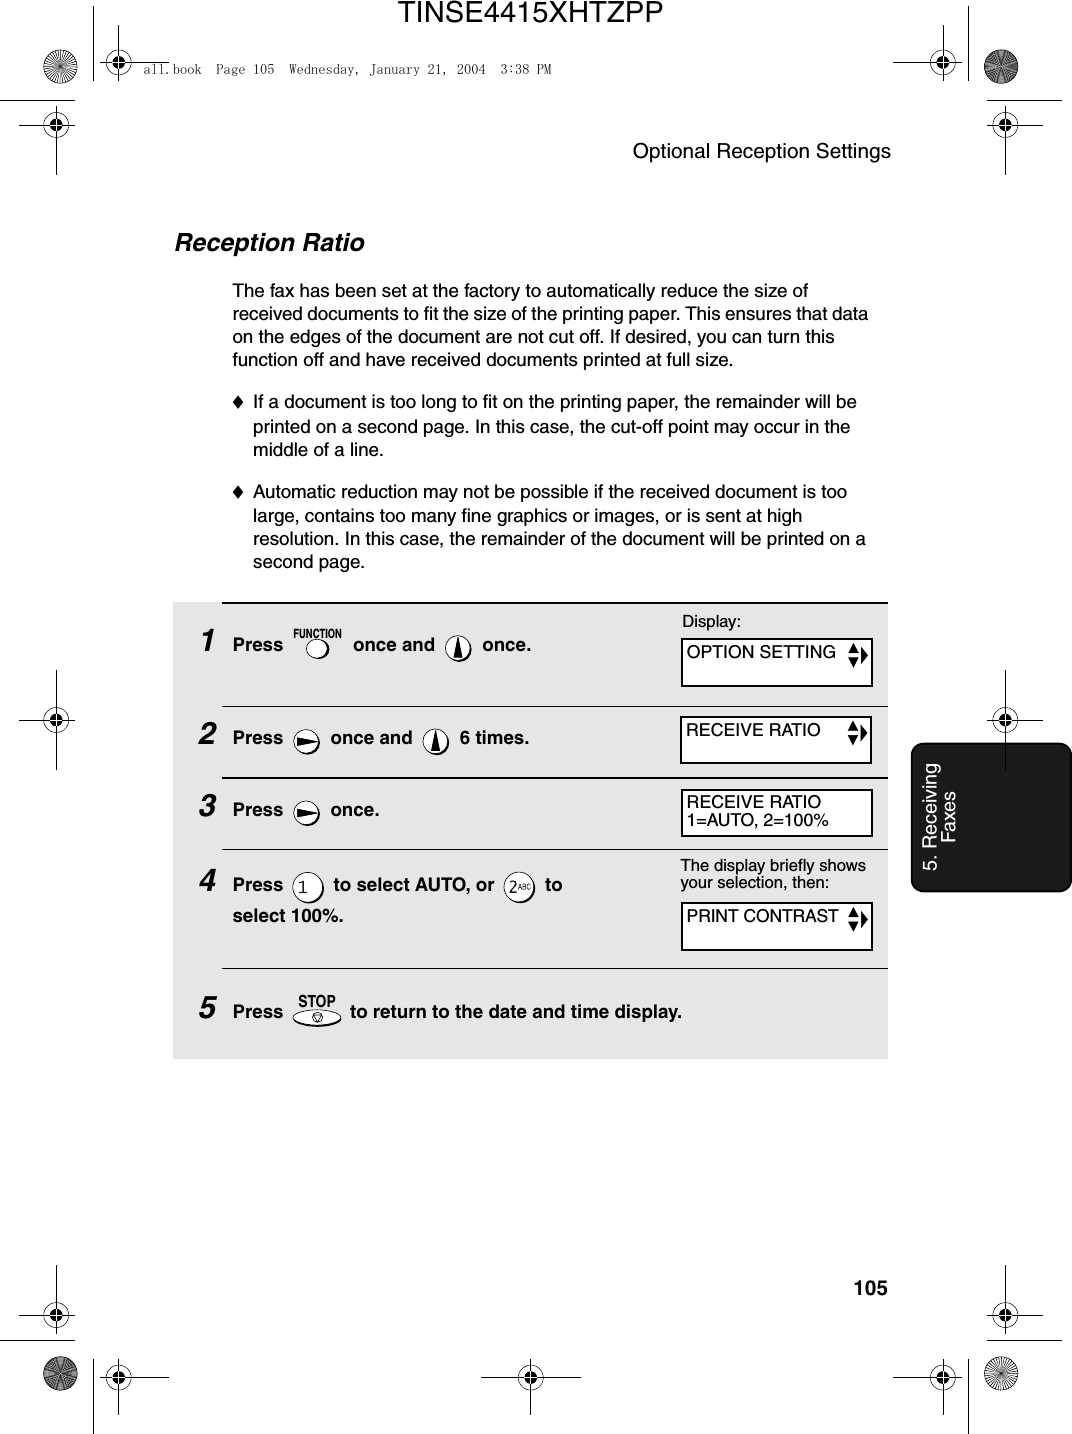 Optional Reception Settings1055. Receiving FaxesReception RatioThe fax has been set at the factory to automatically reduce the size of received documents to fit the size of the printing paper. This ensures that data on the edges of the document are not cut off. If desired, you can turn this function off and have received documents printed at full size.♦If a document is too long to fit on the printing paper, the remainder will be printed on a second page. In this case, the cut-off point may occur in the middle of a line.♦Automatic reduction may not be possible if the received document is too large, contains too many fine graphics or images, or is sent at high resolution. In this case, the remainder of the document will be printed on a second page.1Press   once and   once.2Press   once and   6 times.3Press  once.4Press   to select AUTO, or   to select 100%.5Press   to return to the date and time display.FUNCTIONSTOPThe display briefly shows your selection, then:PRINT CONTRASTDisplay:OPTION SETTINGRECEIVE RATIORECEIVE RATIO1=AUTO, 2=100%all.book  Page 105  Wednesday, January 21, 2004  3:38 PMTINSE4415XHTZPP